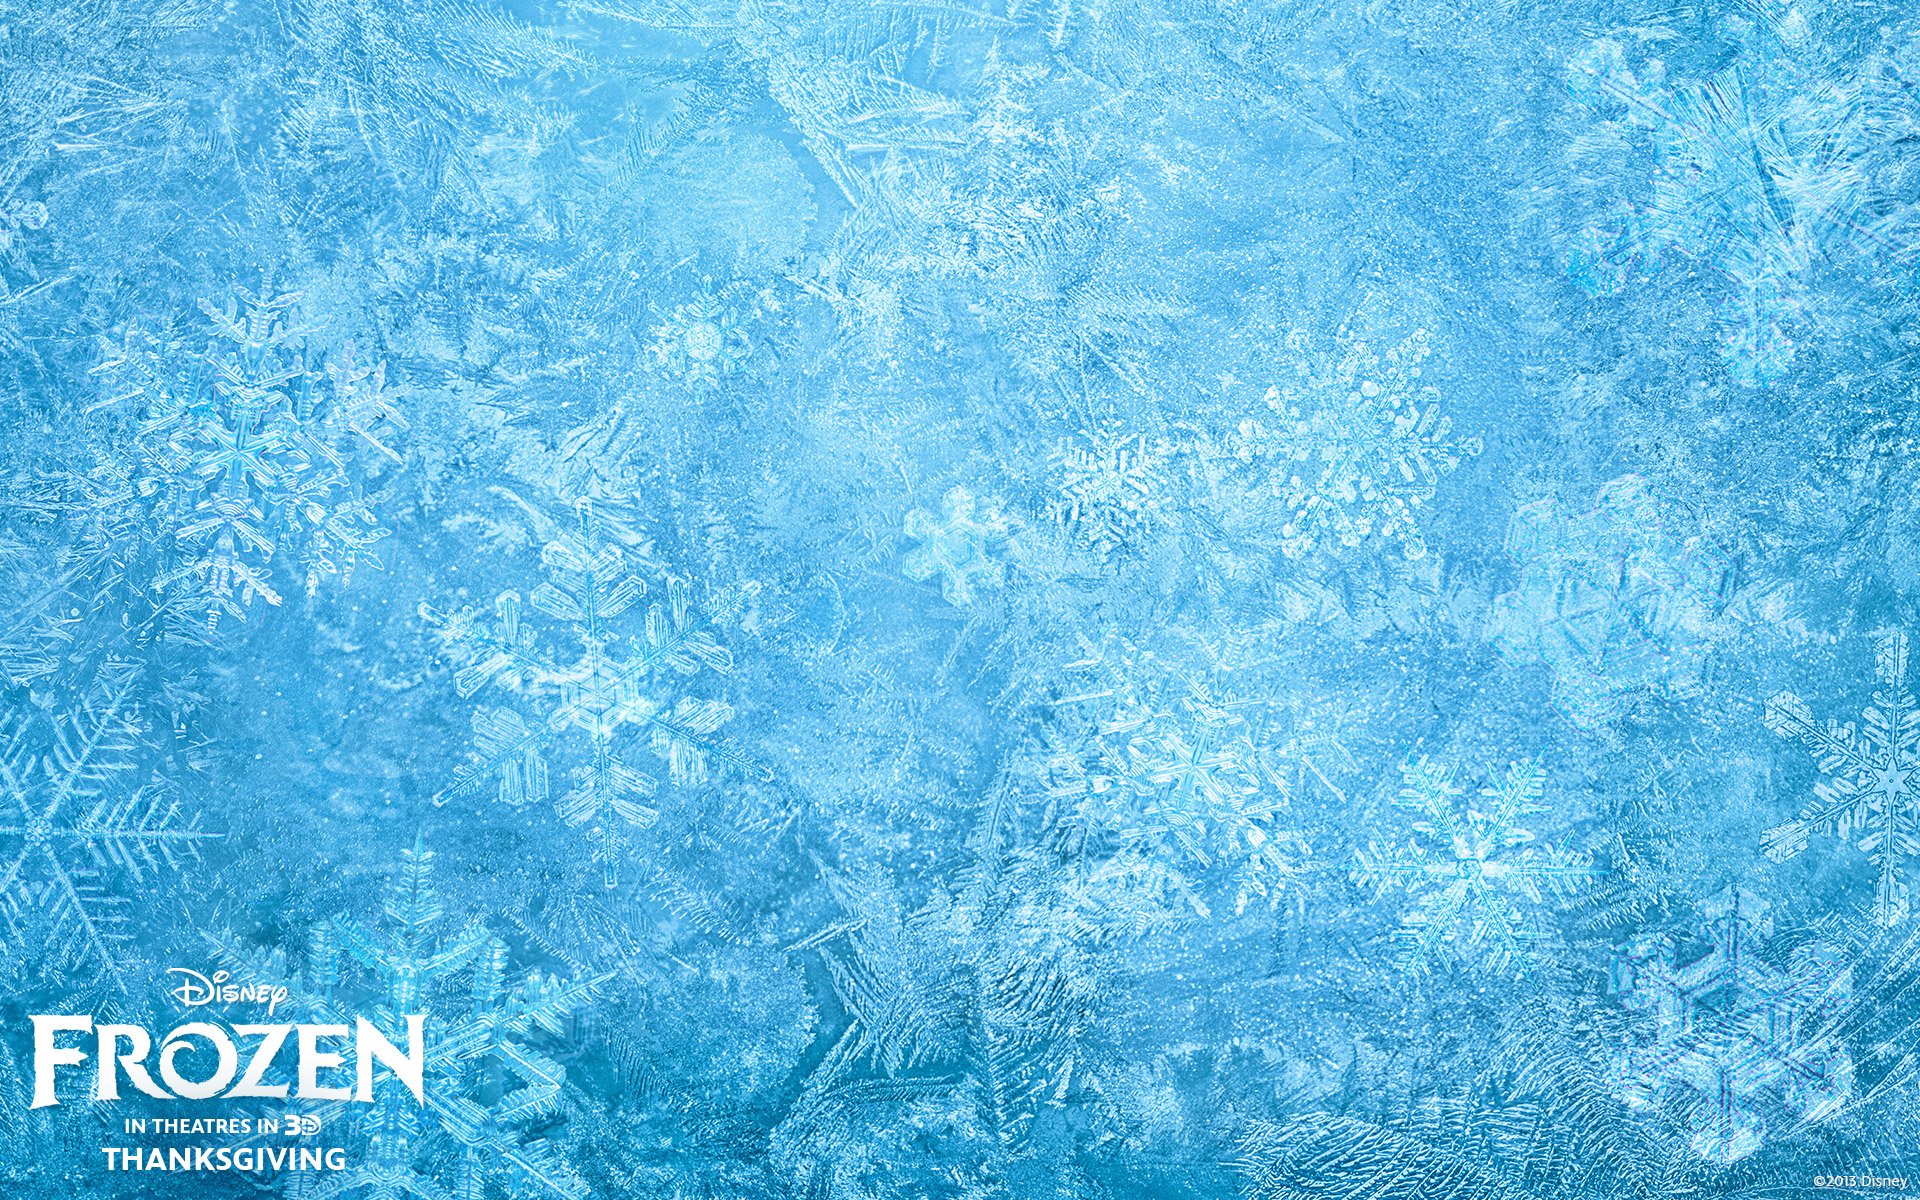 Snowflakes and ice background image from Disneys animated movie